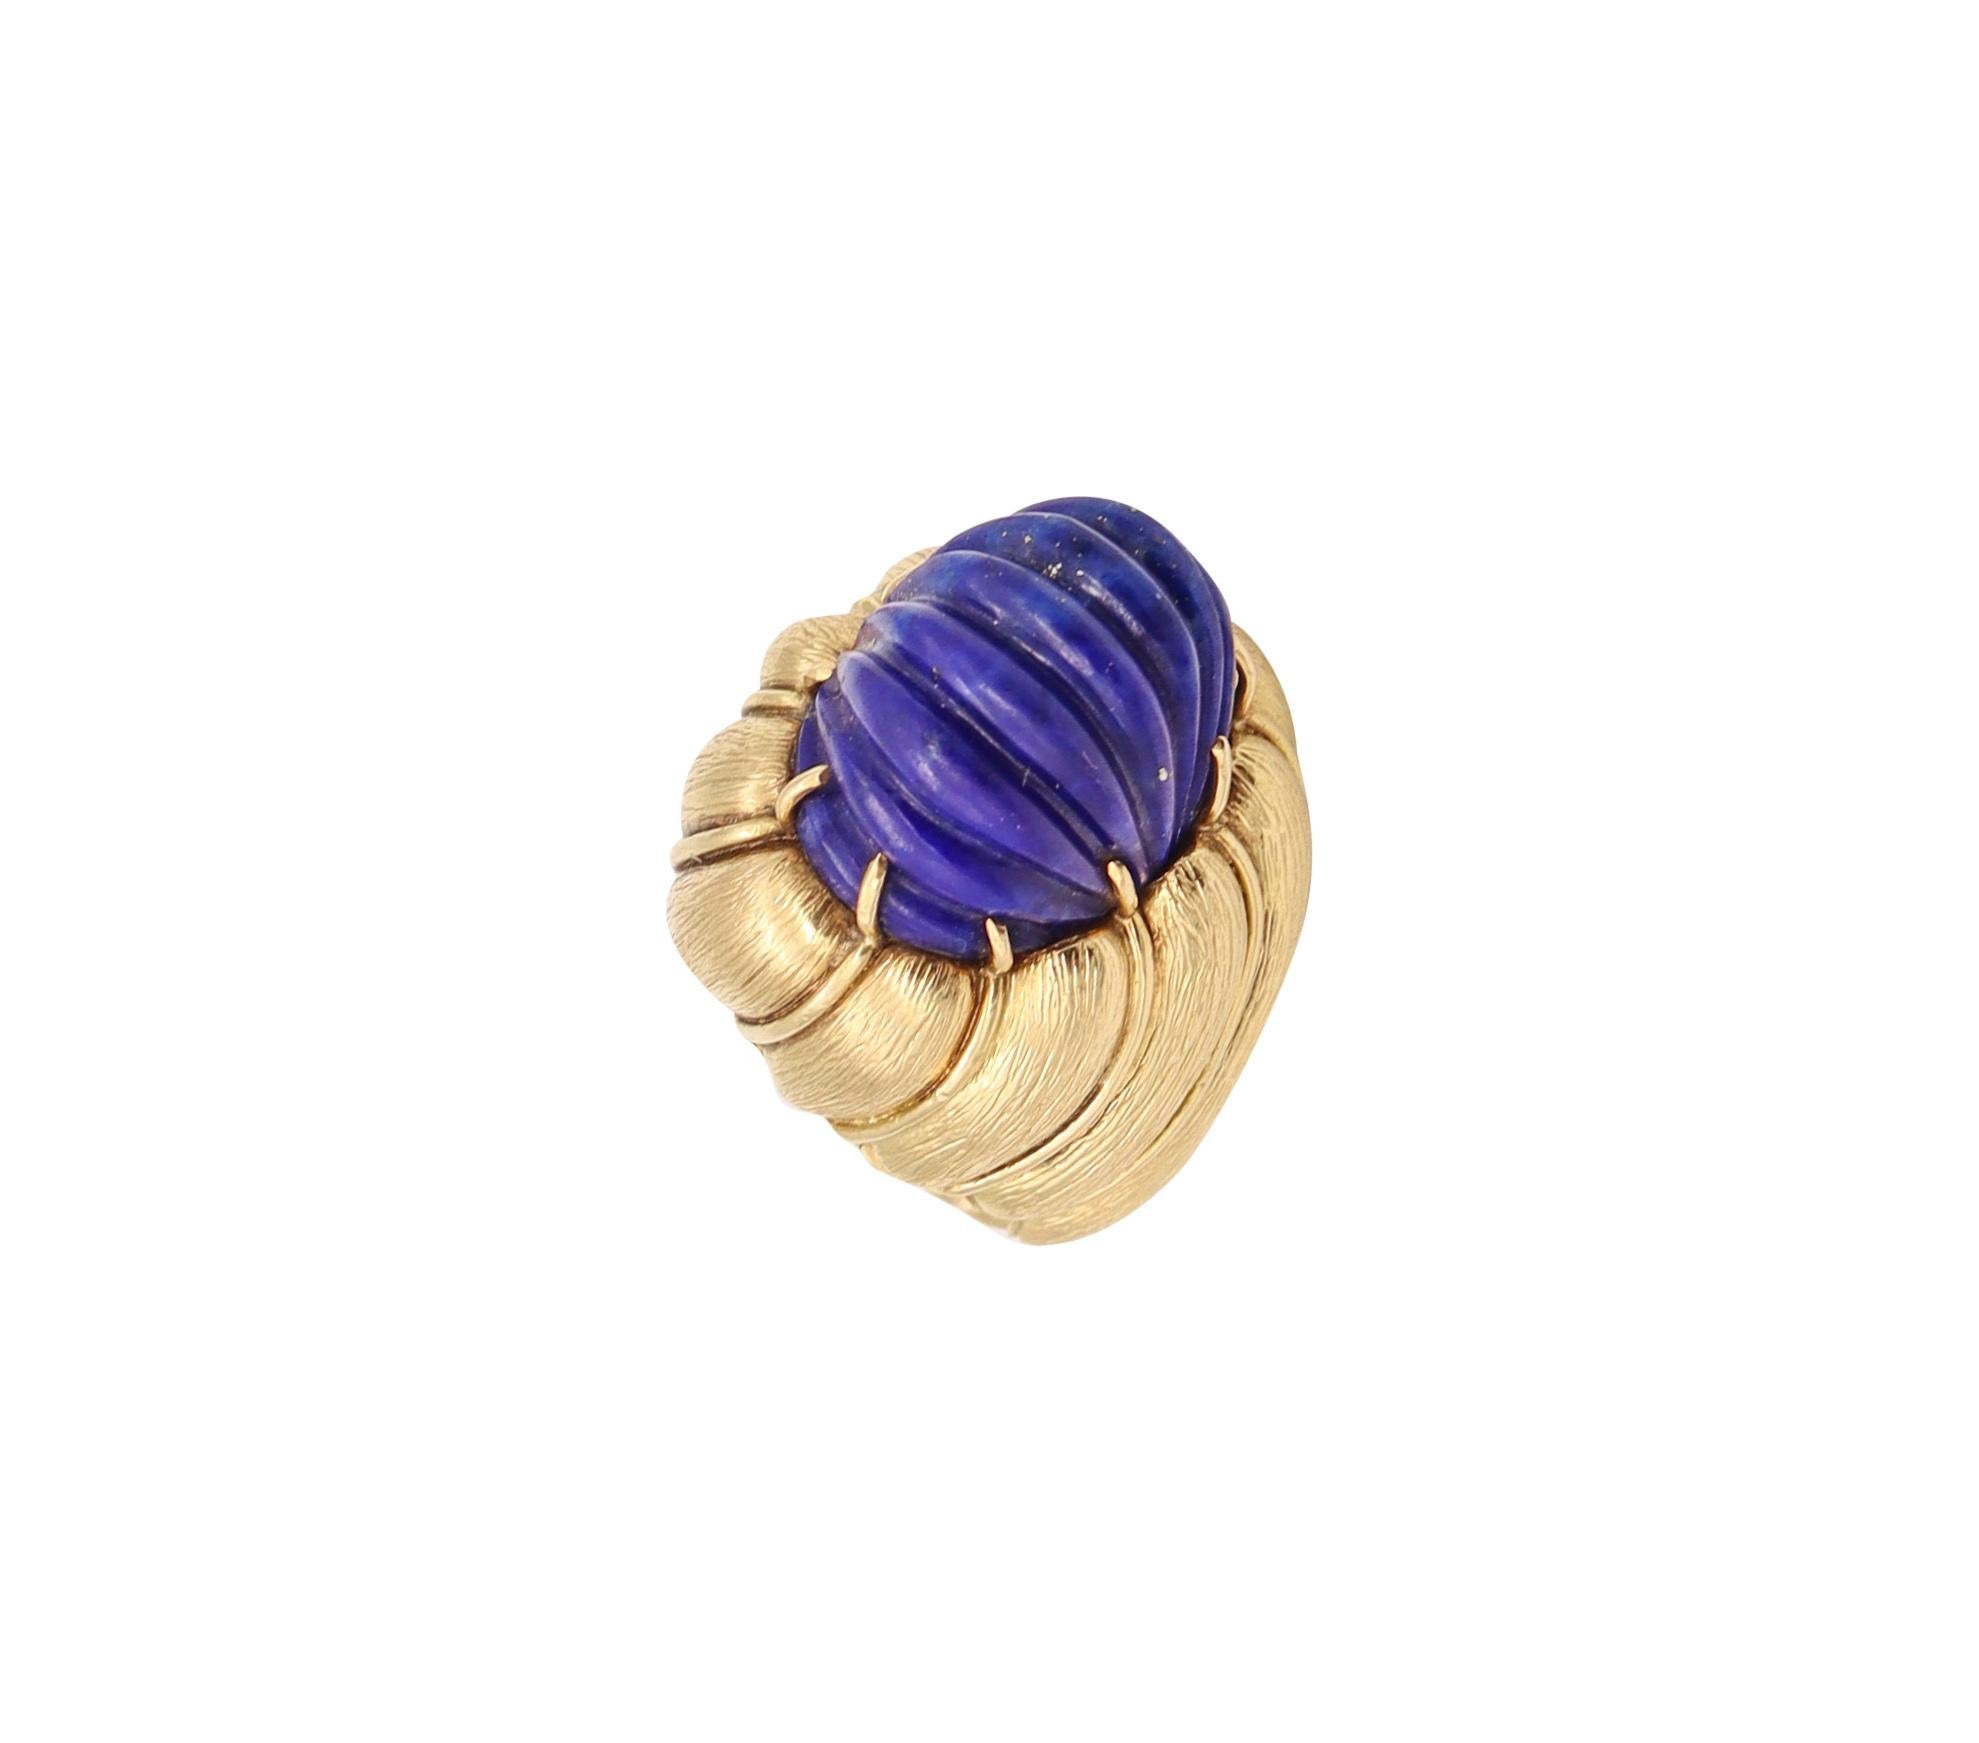 Vintage mid-century Cocktail Ring. 

A beautiful statement piece, created in Italy during the mid-century period, back in the 1960. This elegant cocktail ring was crafted in solid yellow gold of 18 karats, with a delicate brushed, textured and